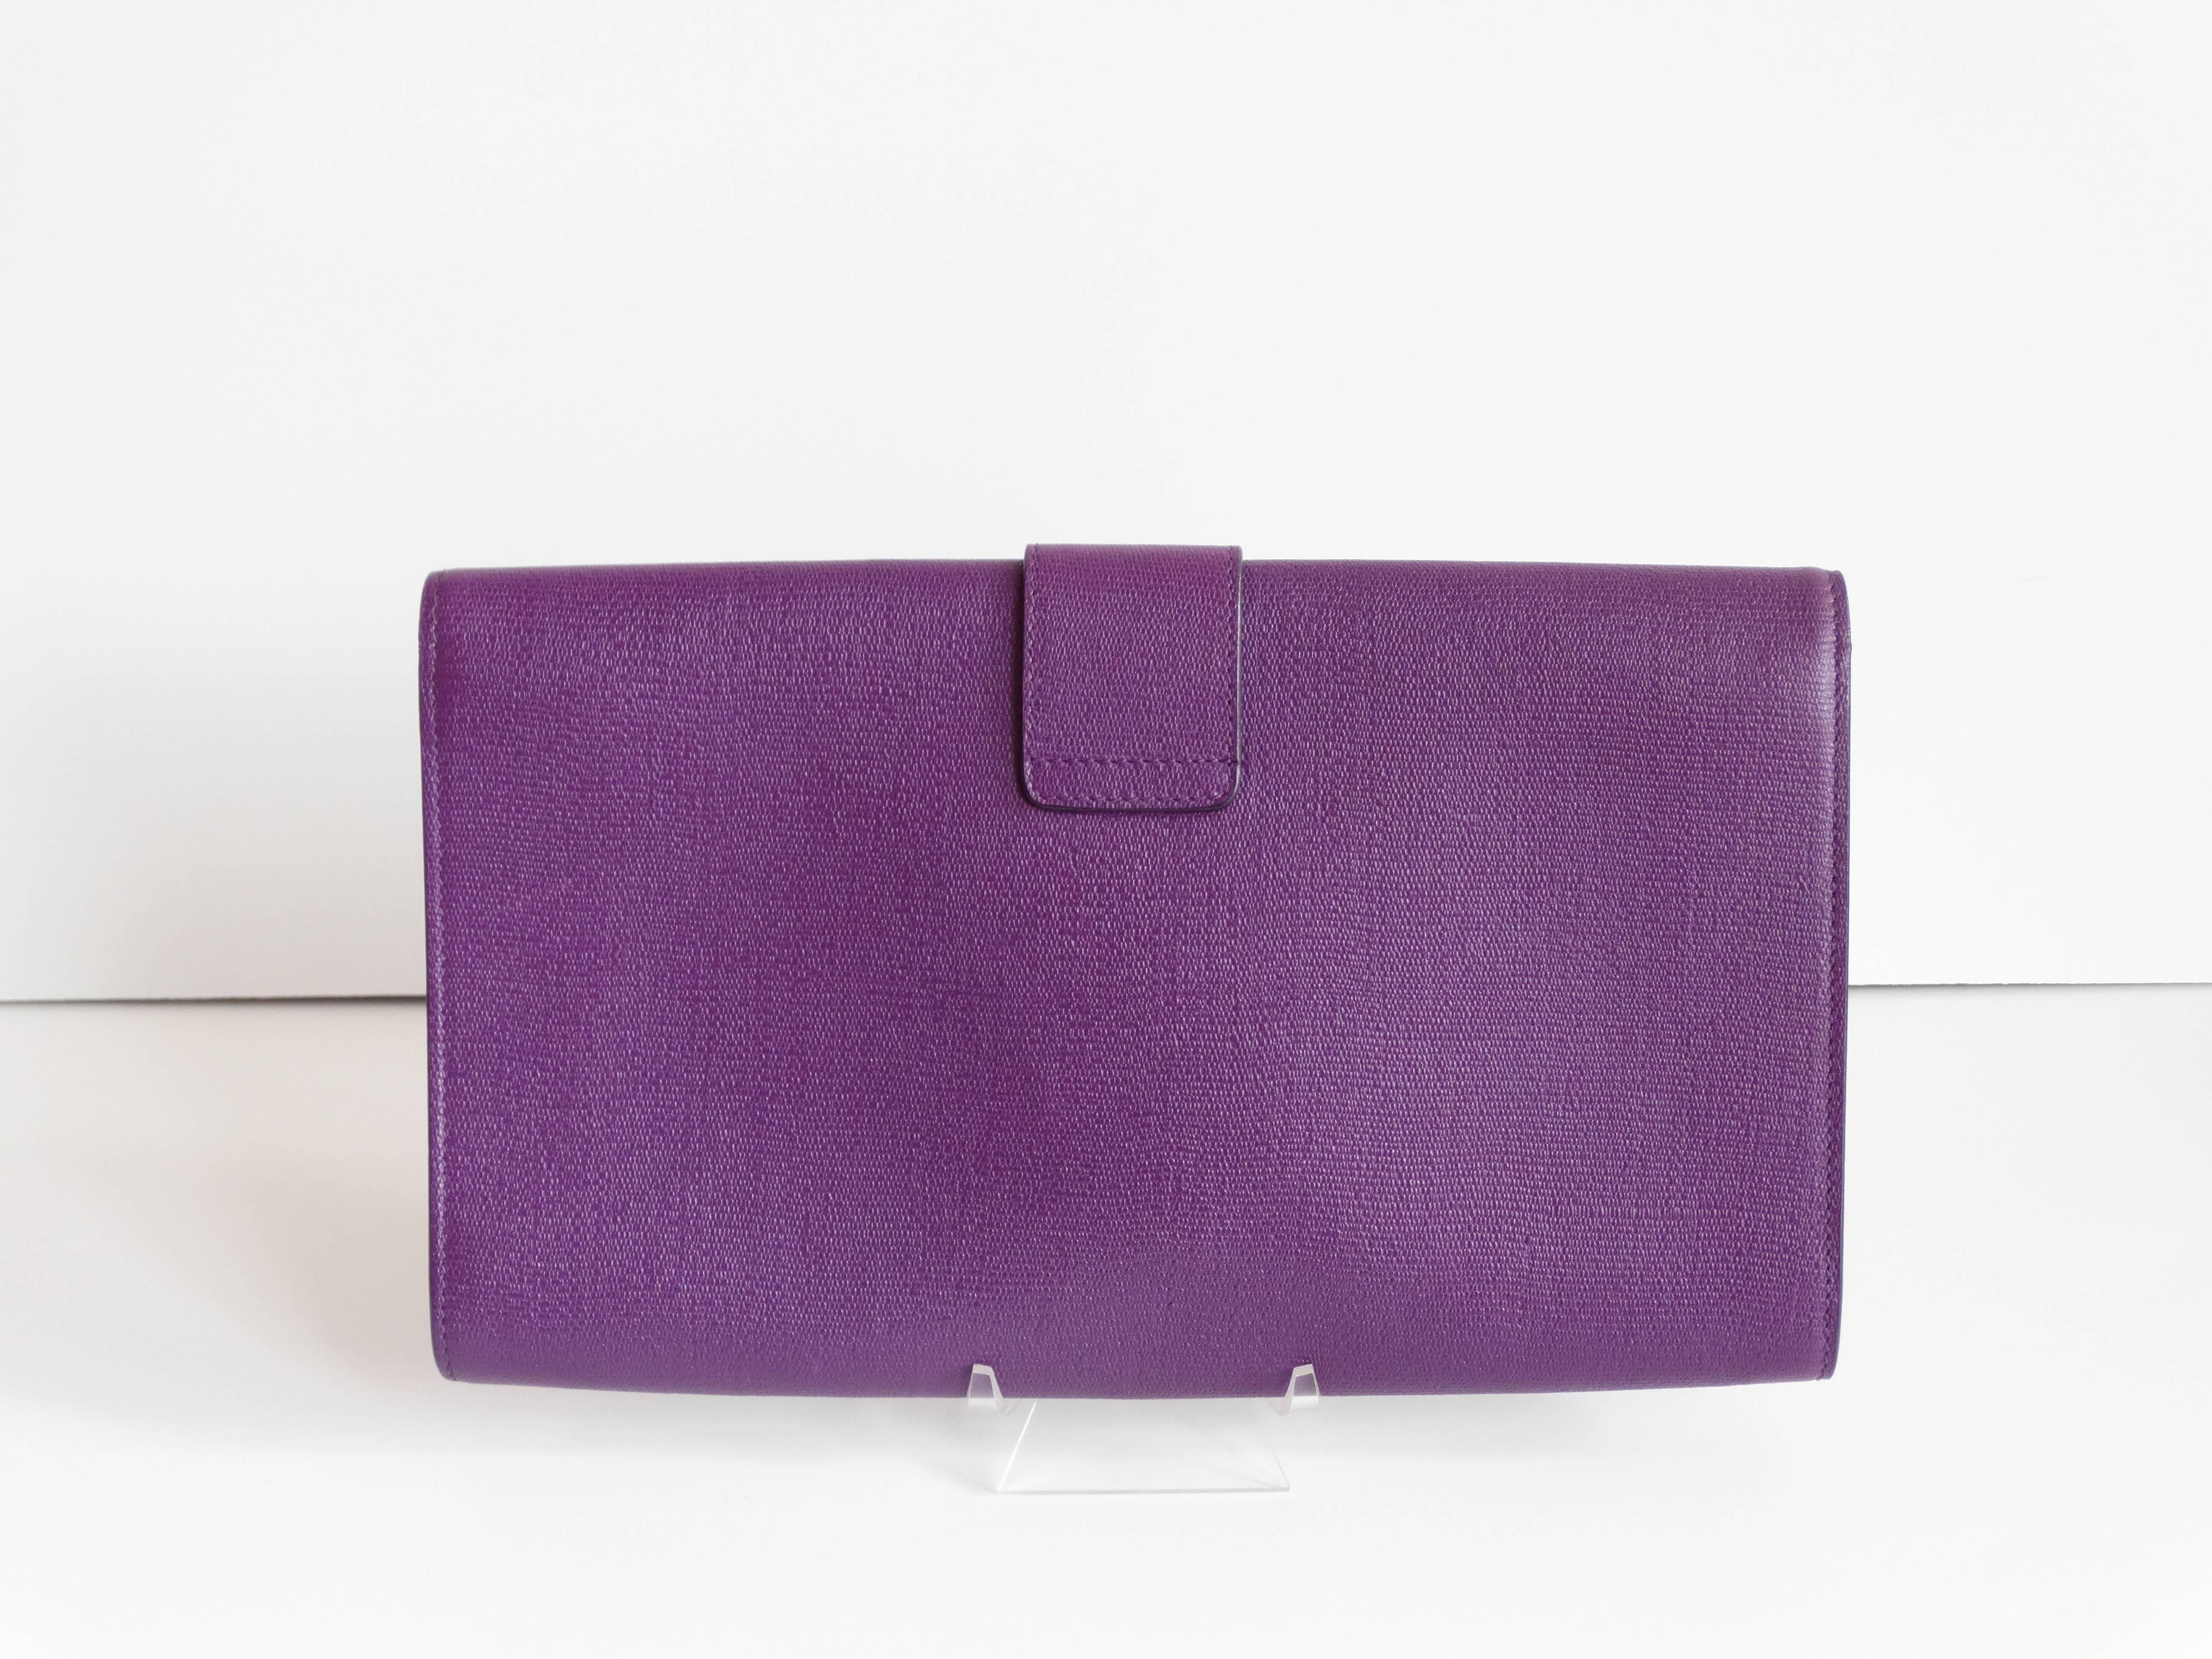 Gray Yves Saint Laurent Cabas Chyc Clutch Bag in Purple 